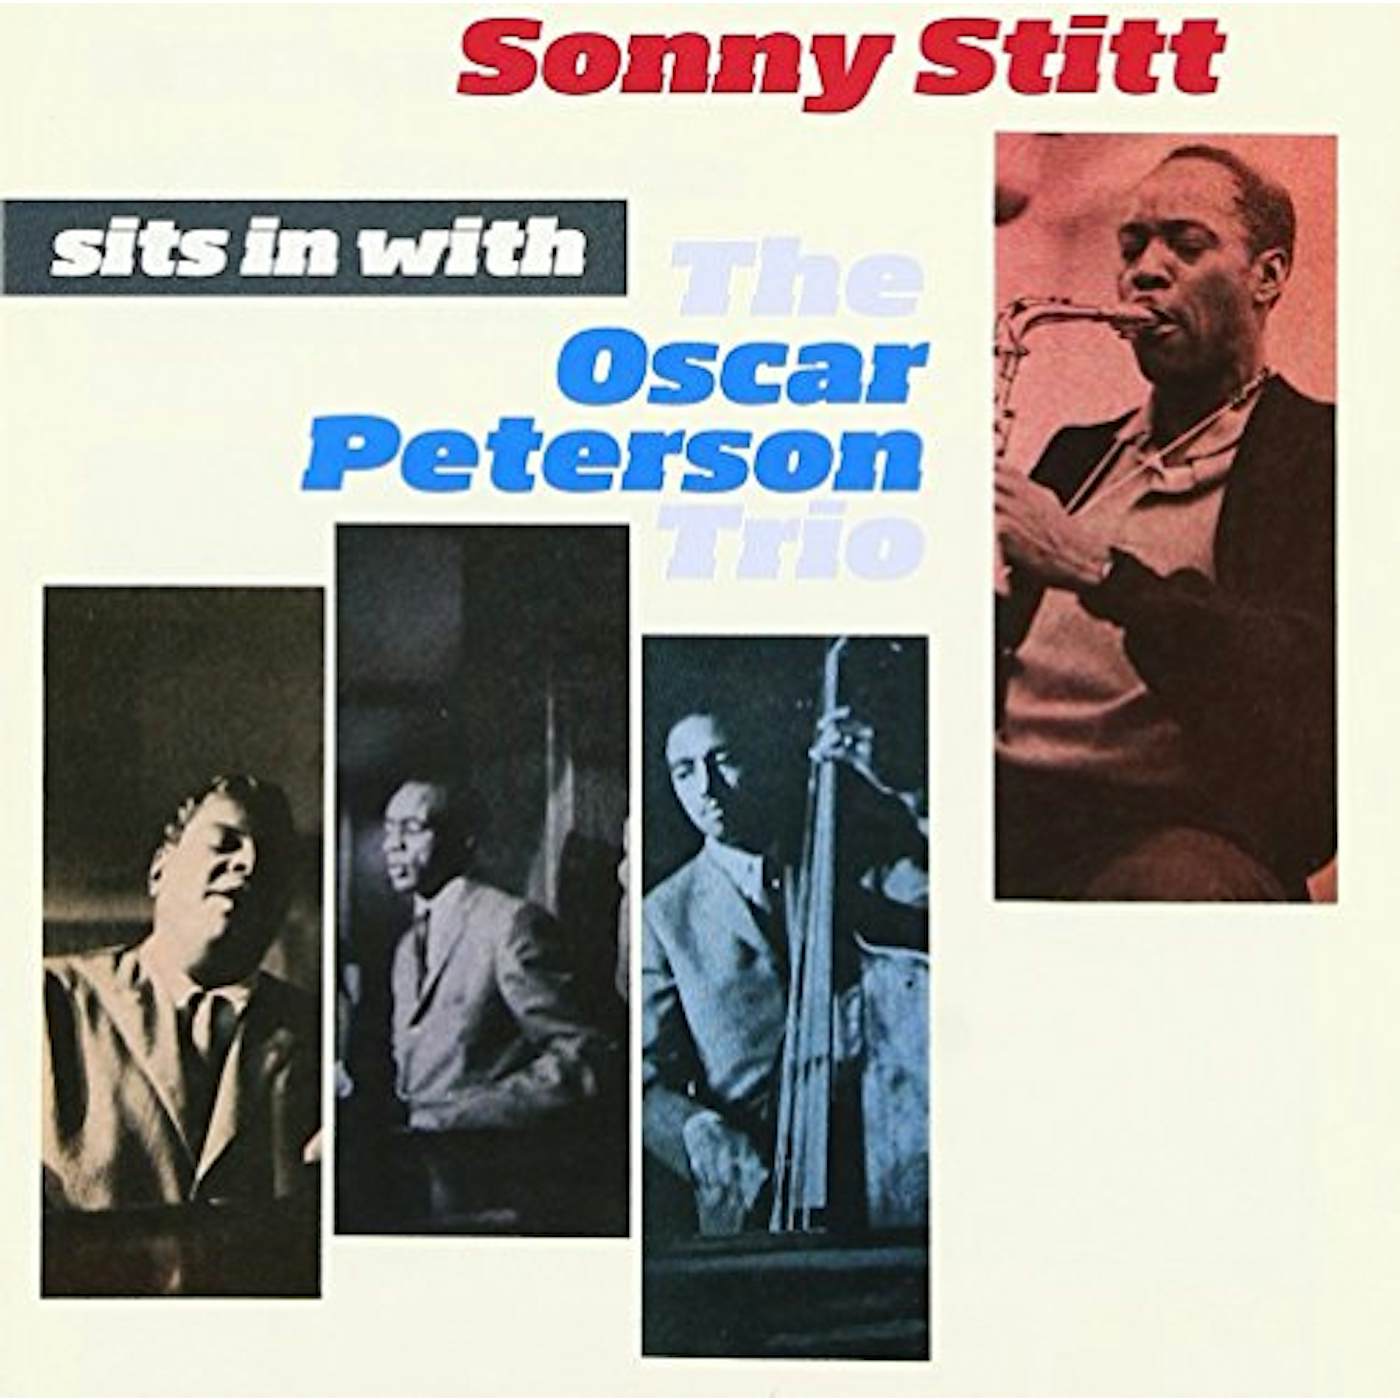 Sonny Stitt SITS IN WITH THE OSCAR PETERSON TRIO CD